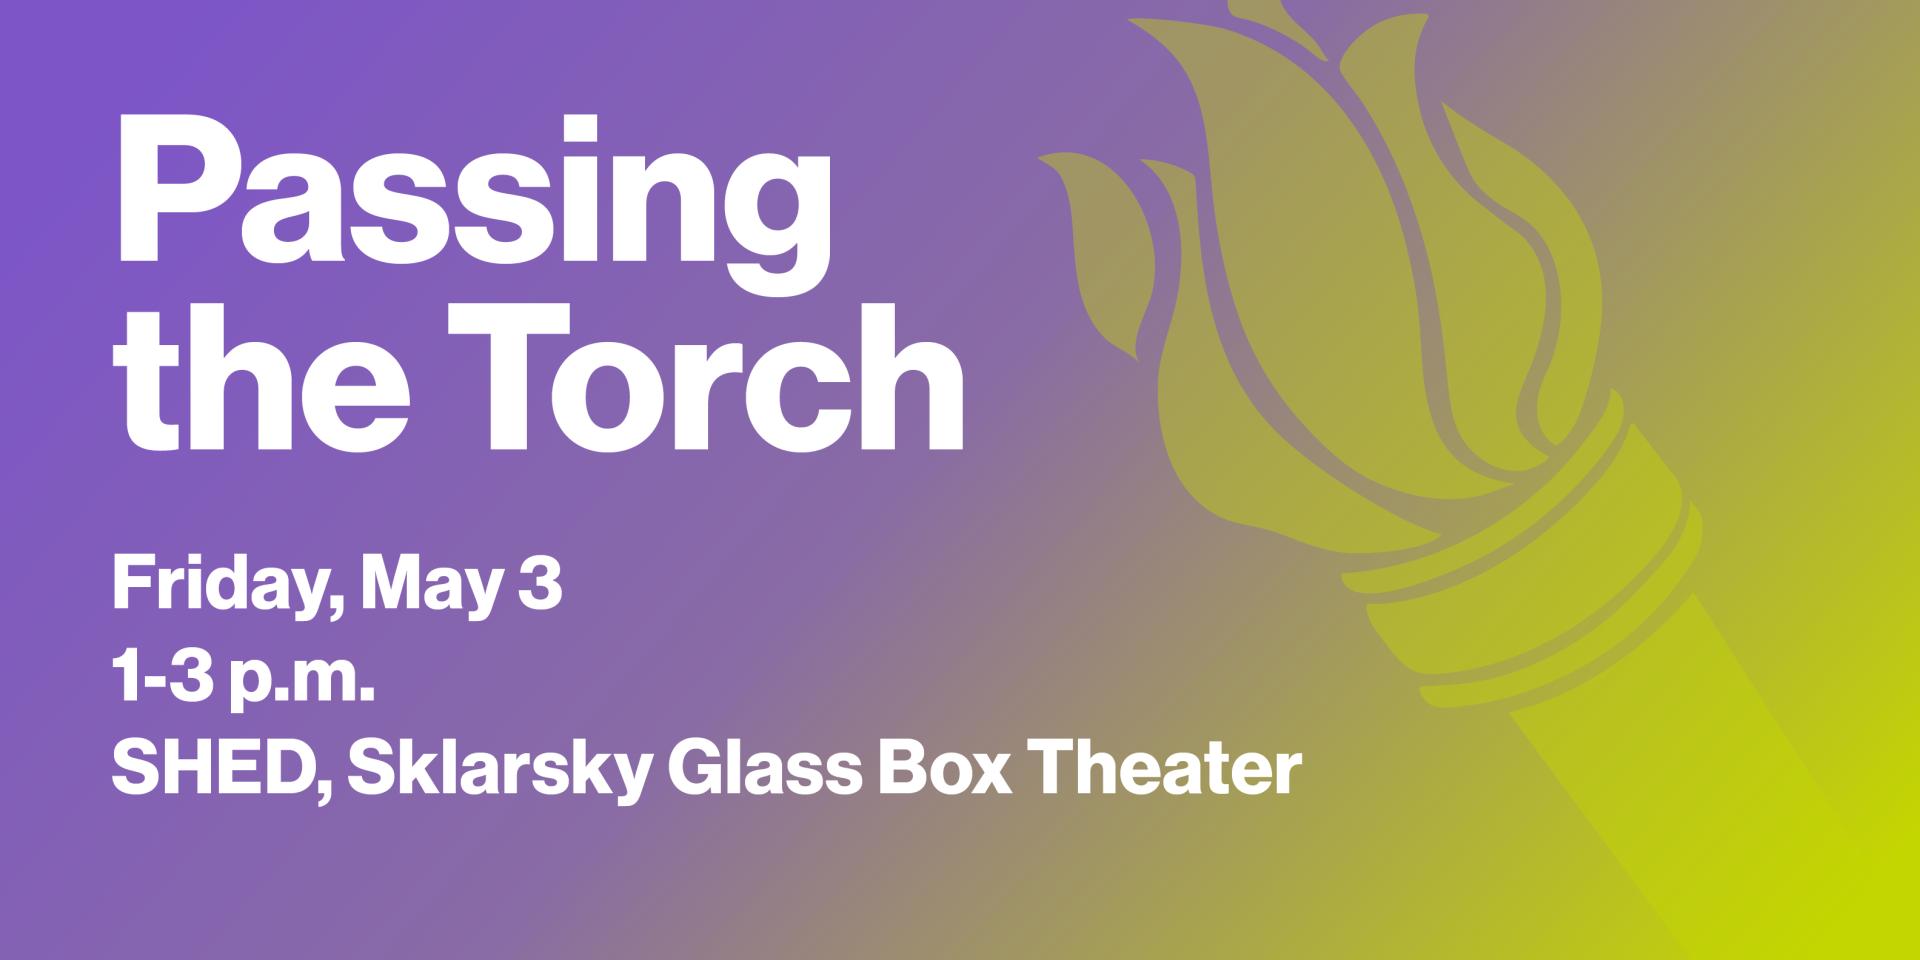 Passing the Torch: Friday, May 3 from 1-3 p.m. in the SHED, Sklarsky Glass Box Theater